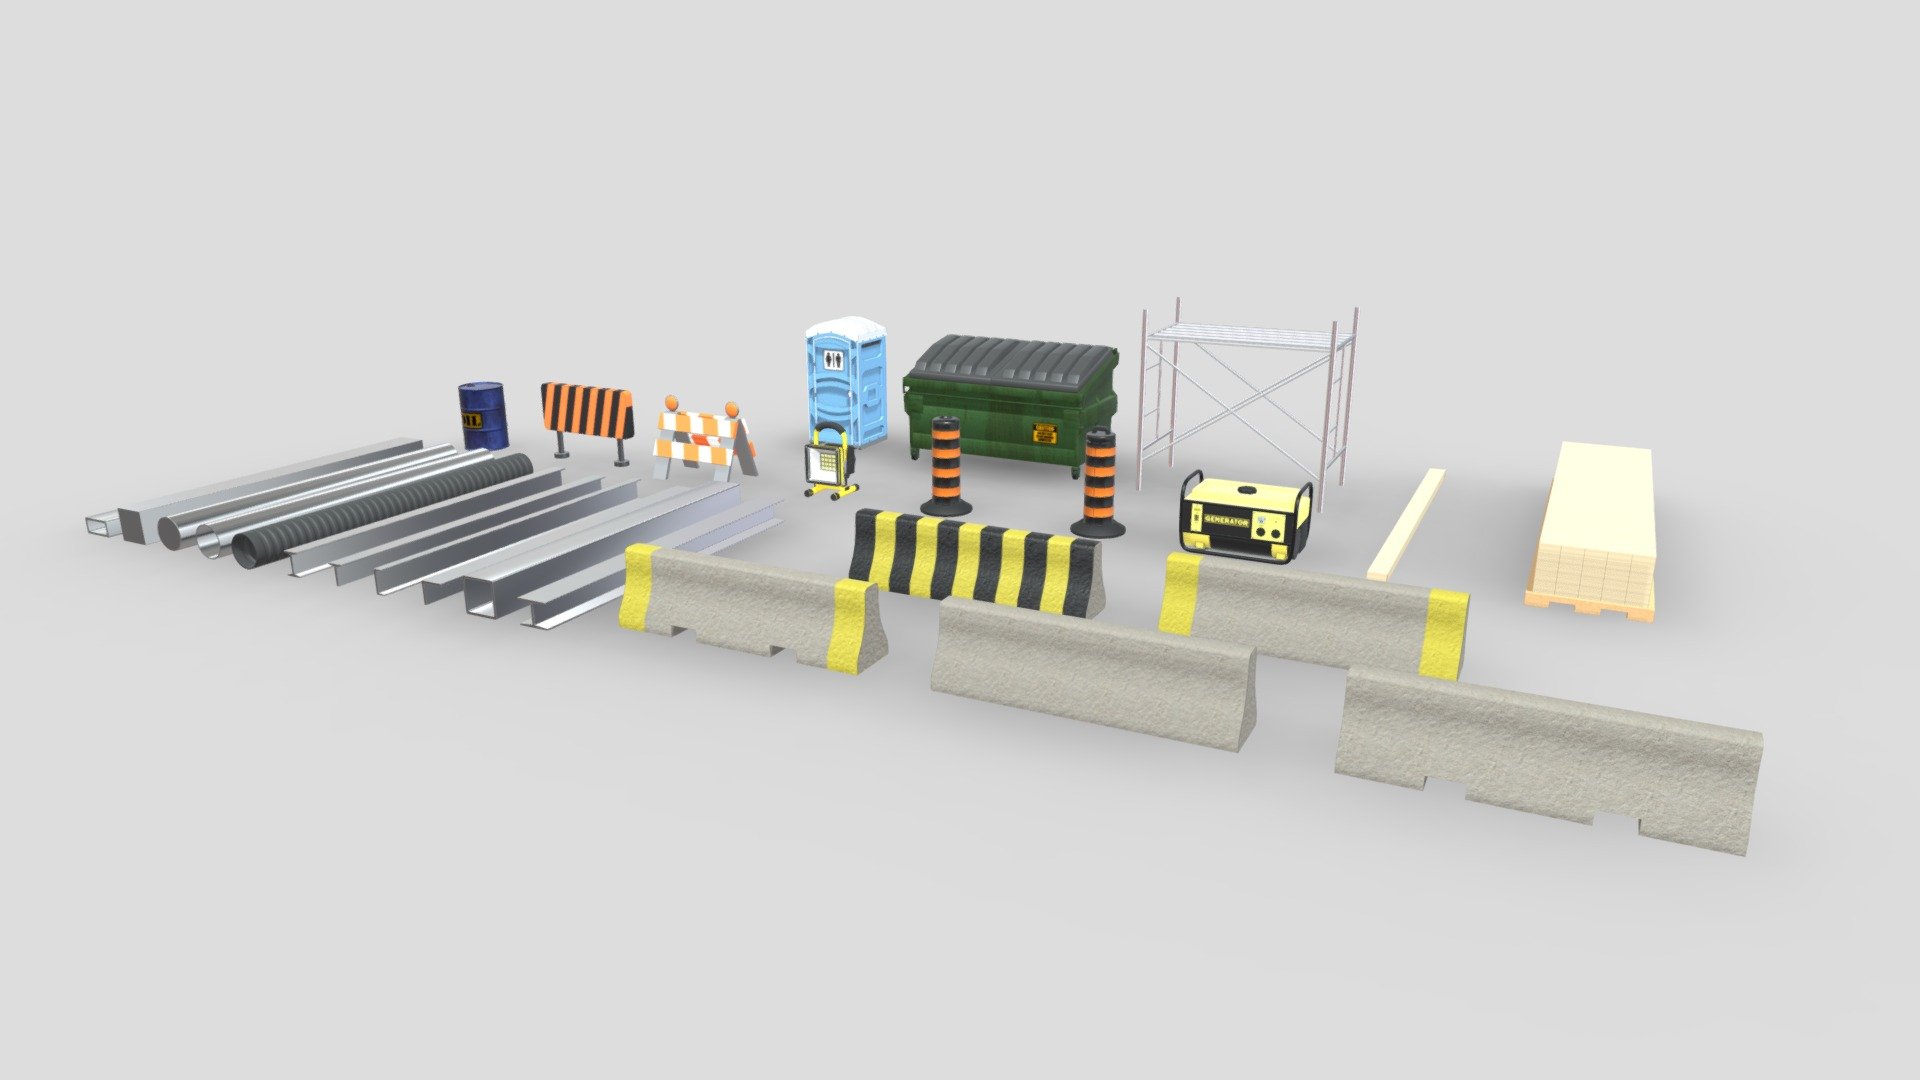 Construction Props Collection made using Blender. This collection includes 29 models. It includes the objects that you could find on any construction site. They can be used in game development, scenes, animations and more.

Features:




Each model was made using the metalness workflow and 4K PBR textures in PNG format

Collection includes 29 models

Native blend files are included which all have camera and lighting setups

Native blend files include pre-applied textures to each model

HDRi maps for lighting downloaded from HDRi Haven are included

All models have been exported in 4 file formats (FBX, OBJ, GLTF/GLB, DAE/Collada)

Included Textures:




AO, Diffuse (Alpha), Roughness, Gloss, Normal, Metallic

UVLayout

The source file that is uploaded is for demonstration use and is uploaded in FBX format. In the additional file you will find all model exports and the textures that go along with them 3d model